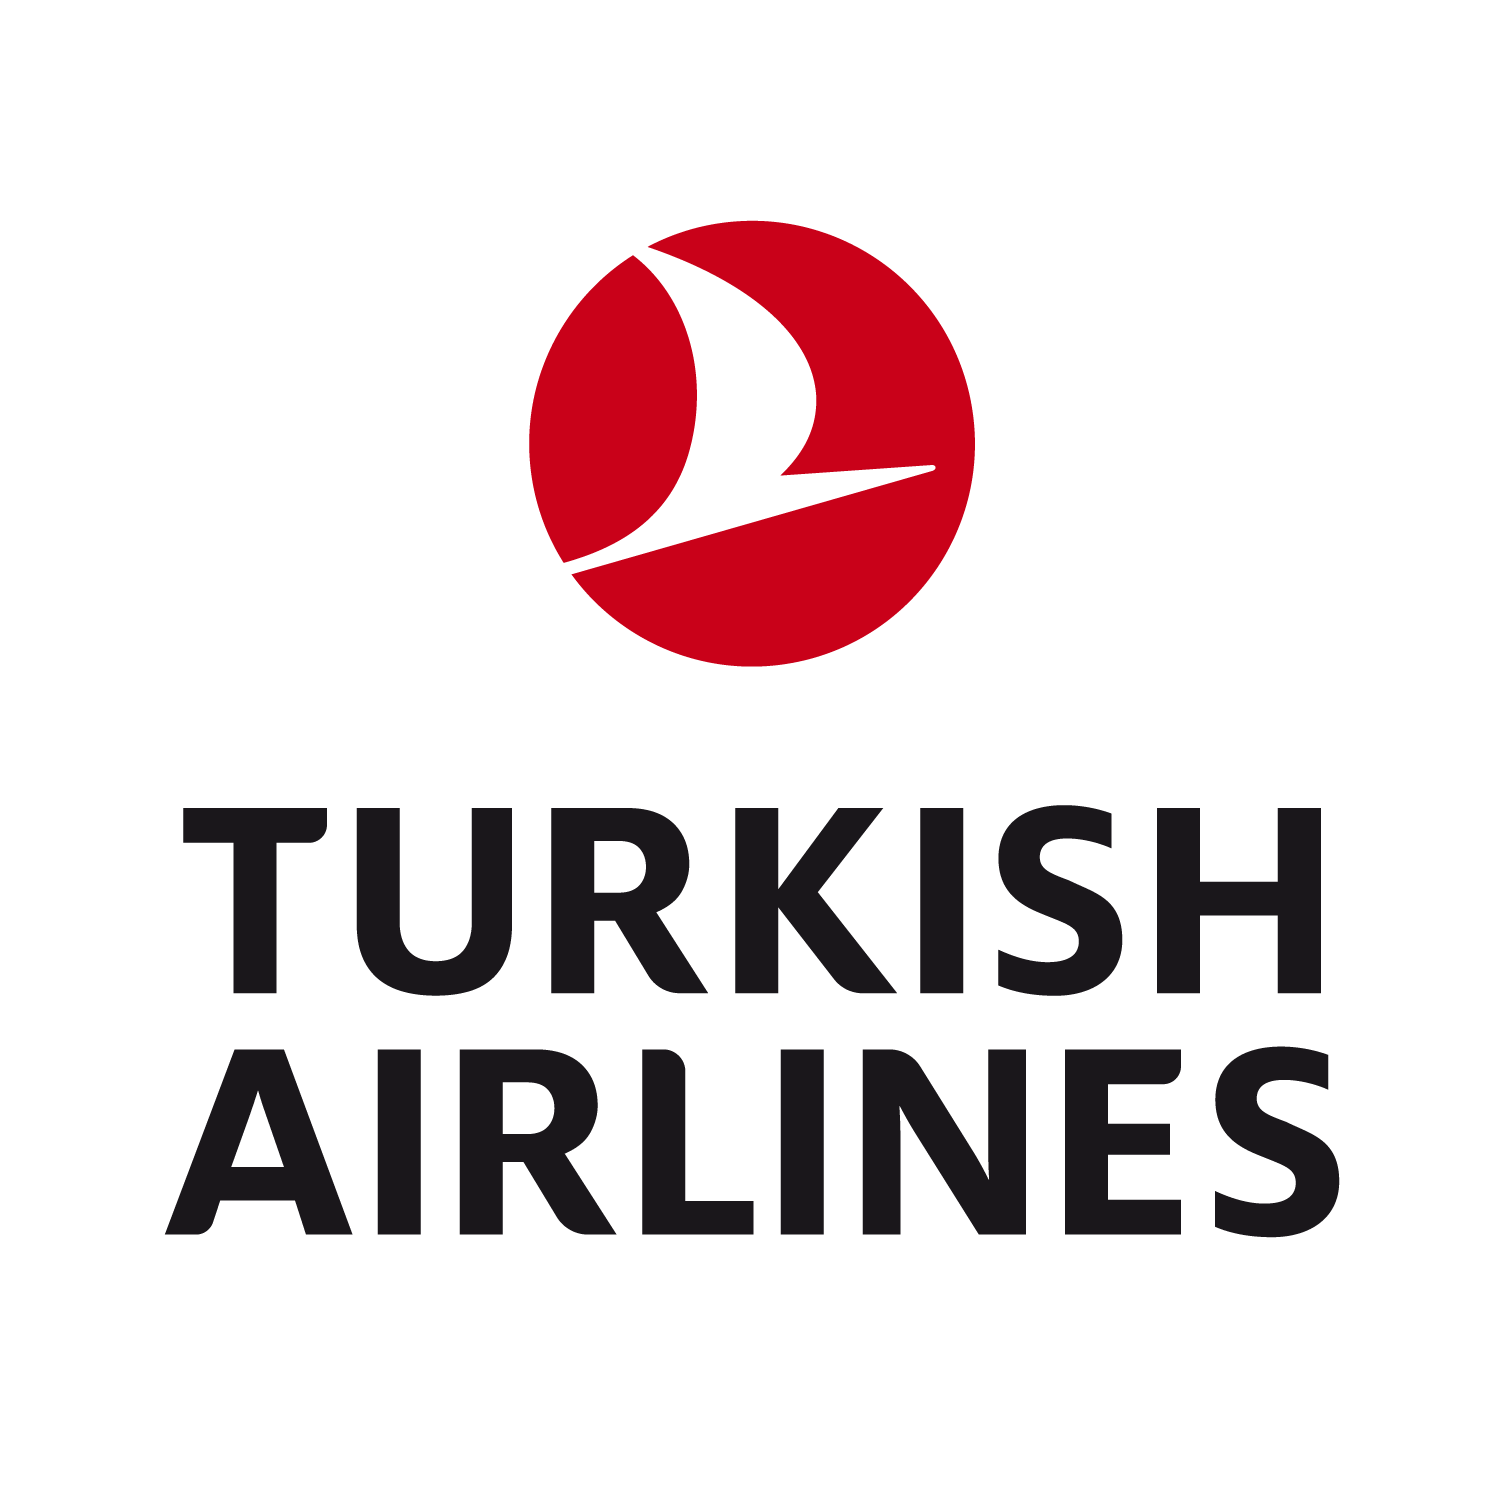 TURKISH_AIRLINES_LOGO.png